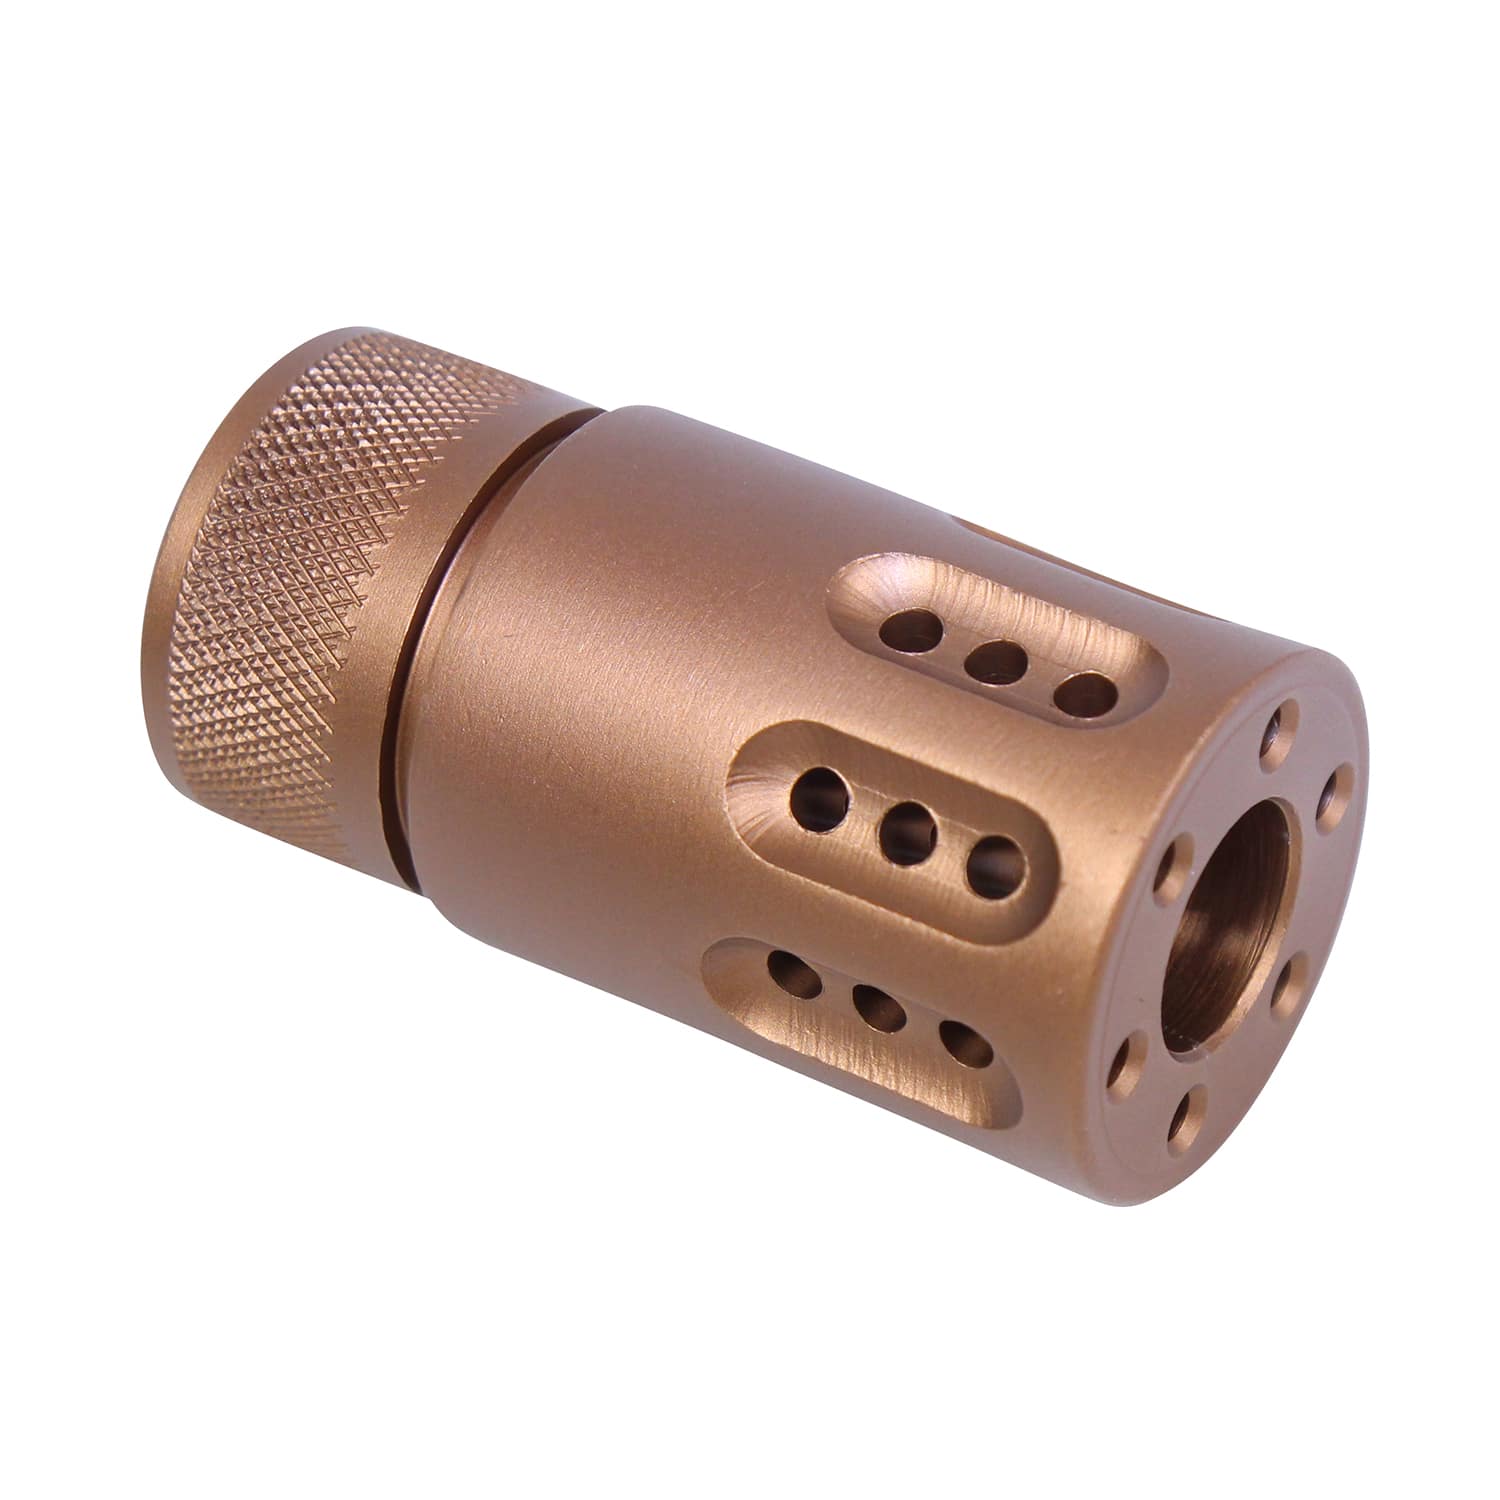 Compact AR-15 muzzle brake with barrel shroud in anodized bronze